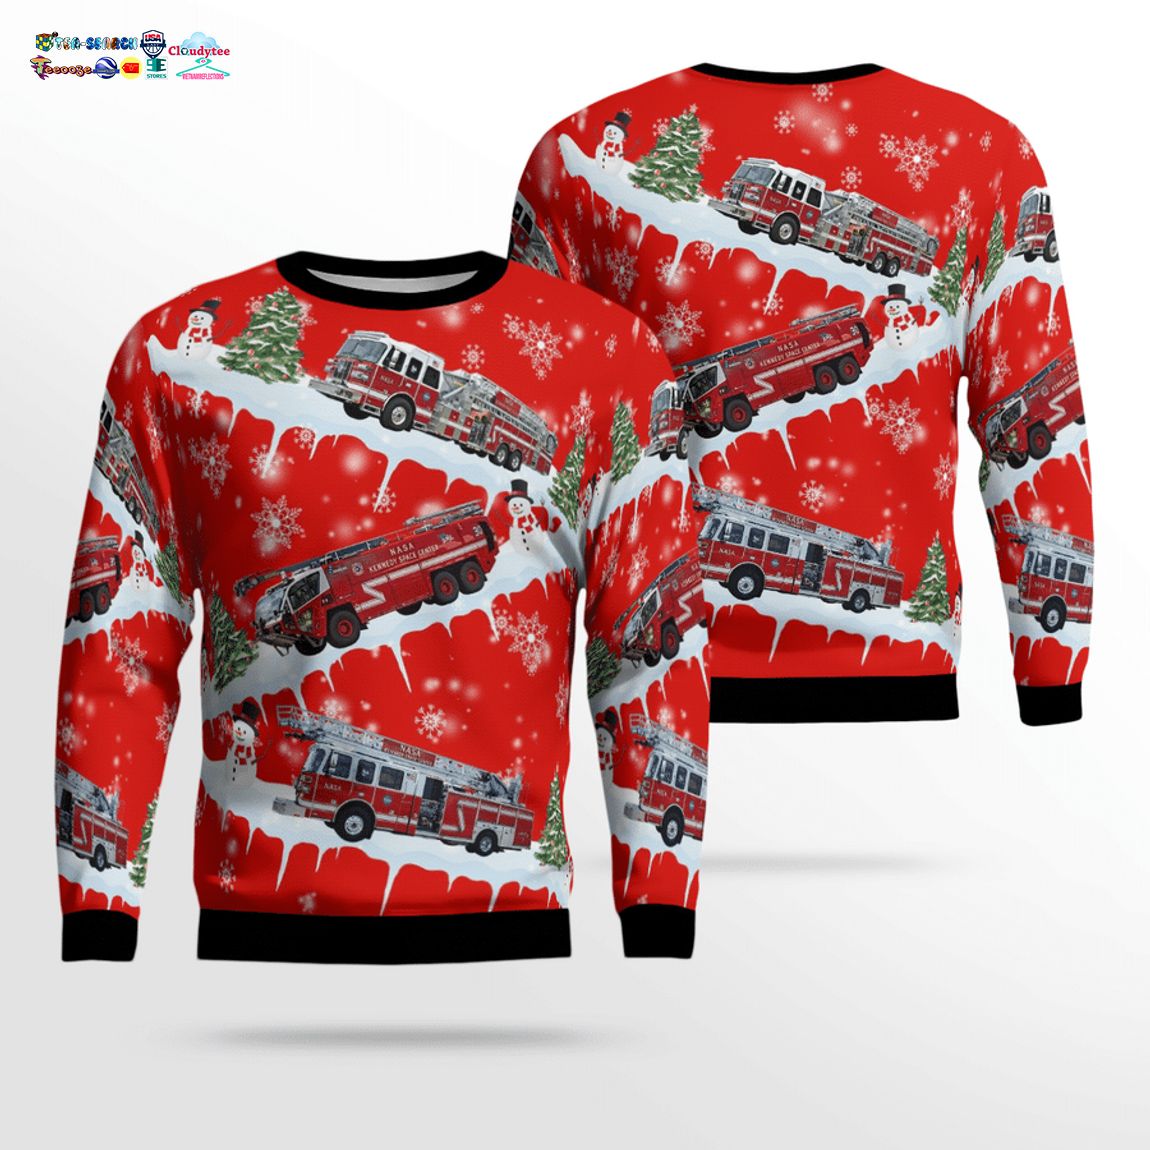 florida-nasa-kennedy-space-center-fire-rescue-3d-christmas-sweater-1-vxqFT.jpg